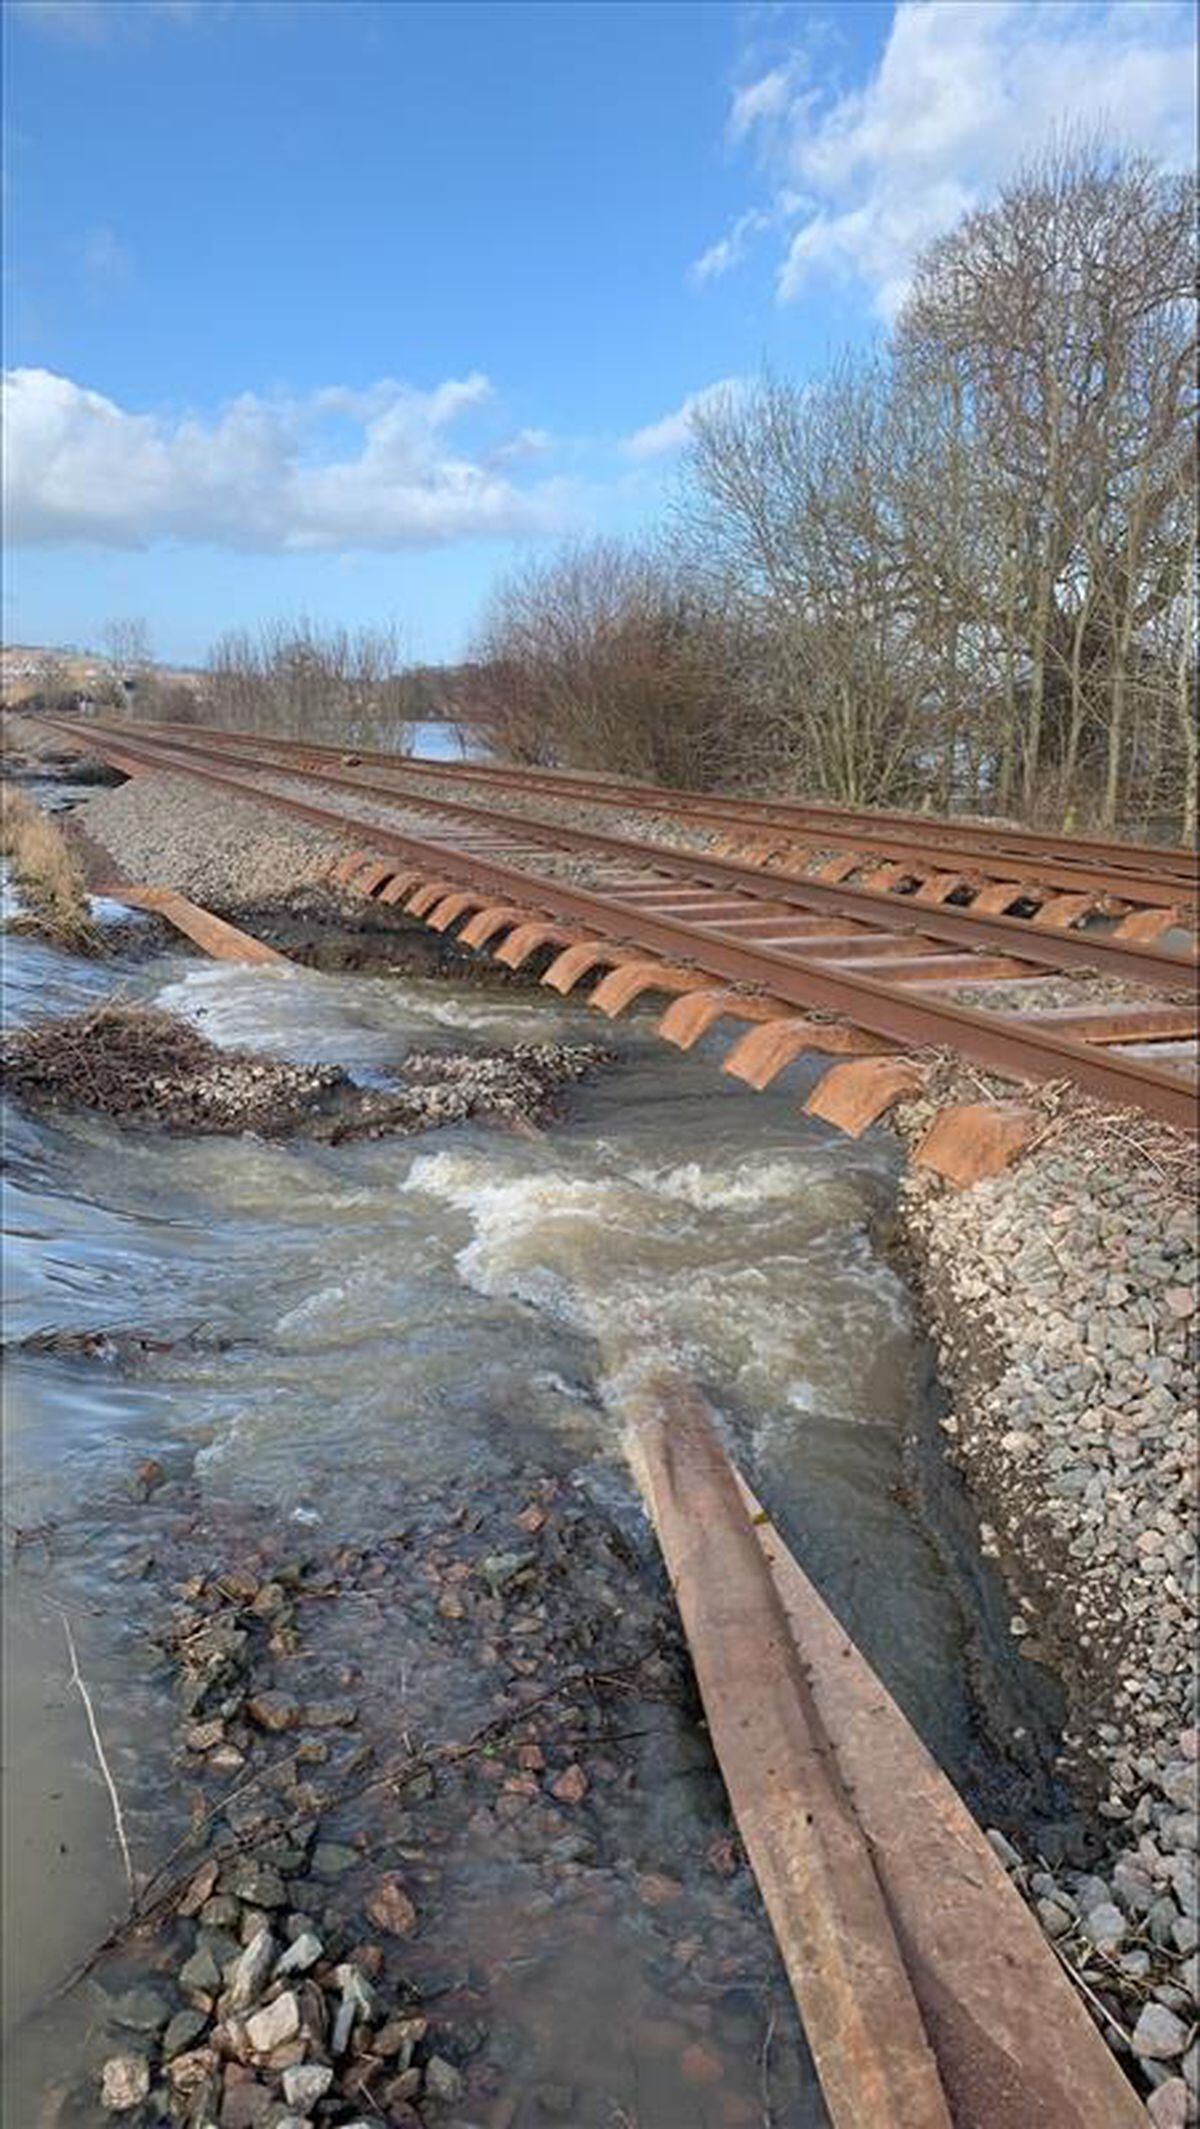 Damage to the Cambrian Line near Welshpool is extensive, with at least 12 places in just half a mile needing repair